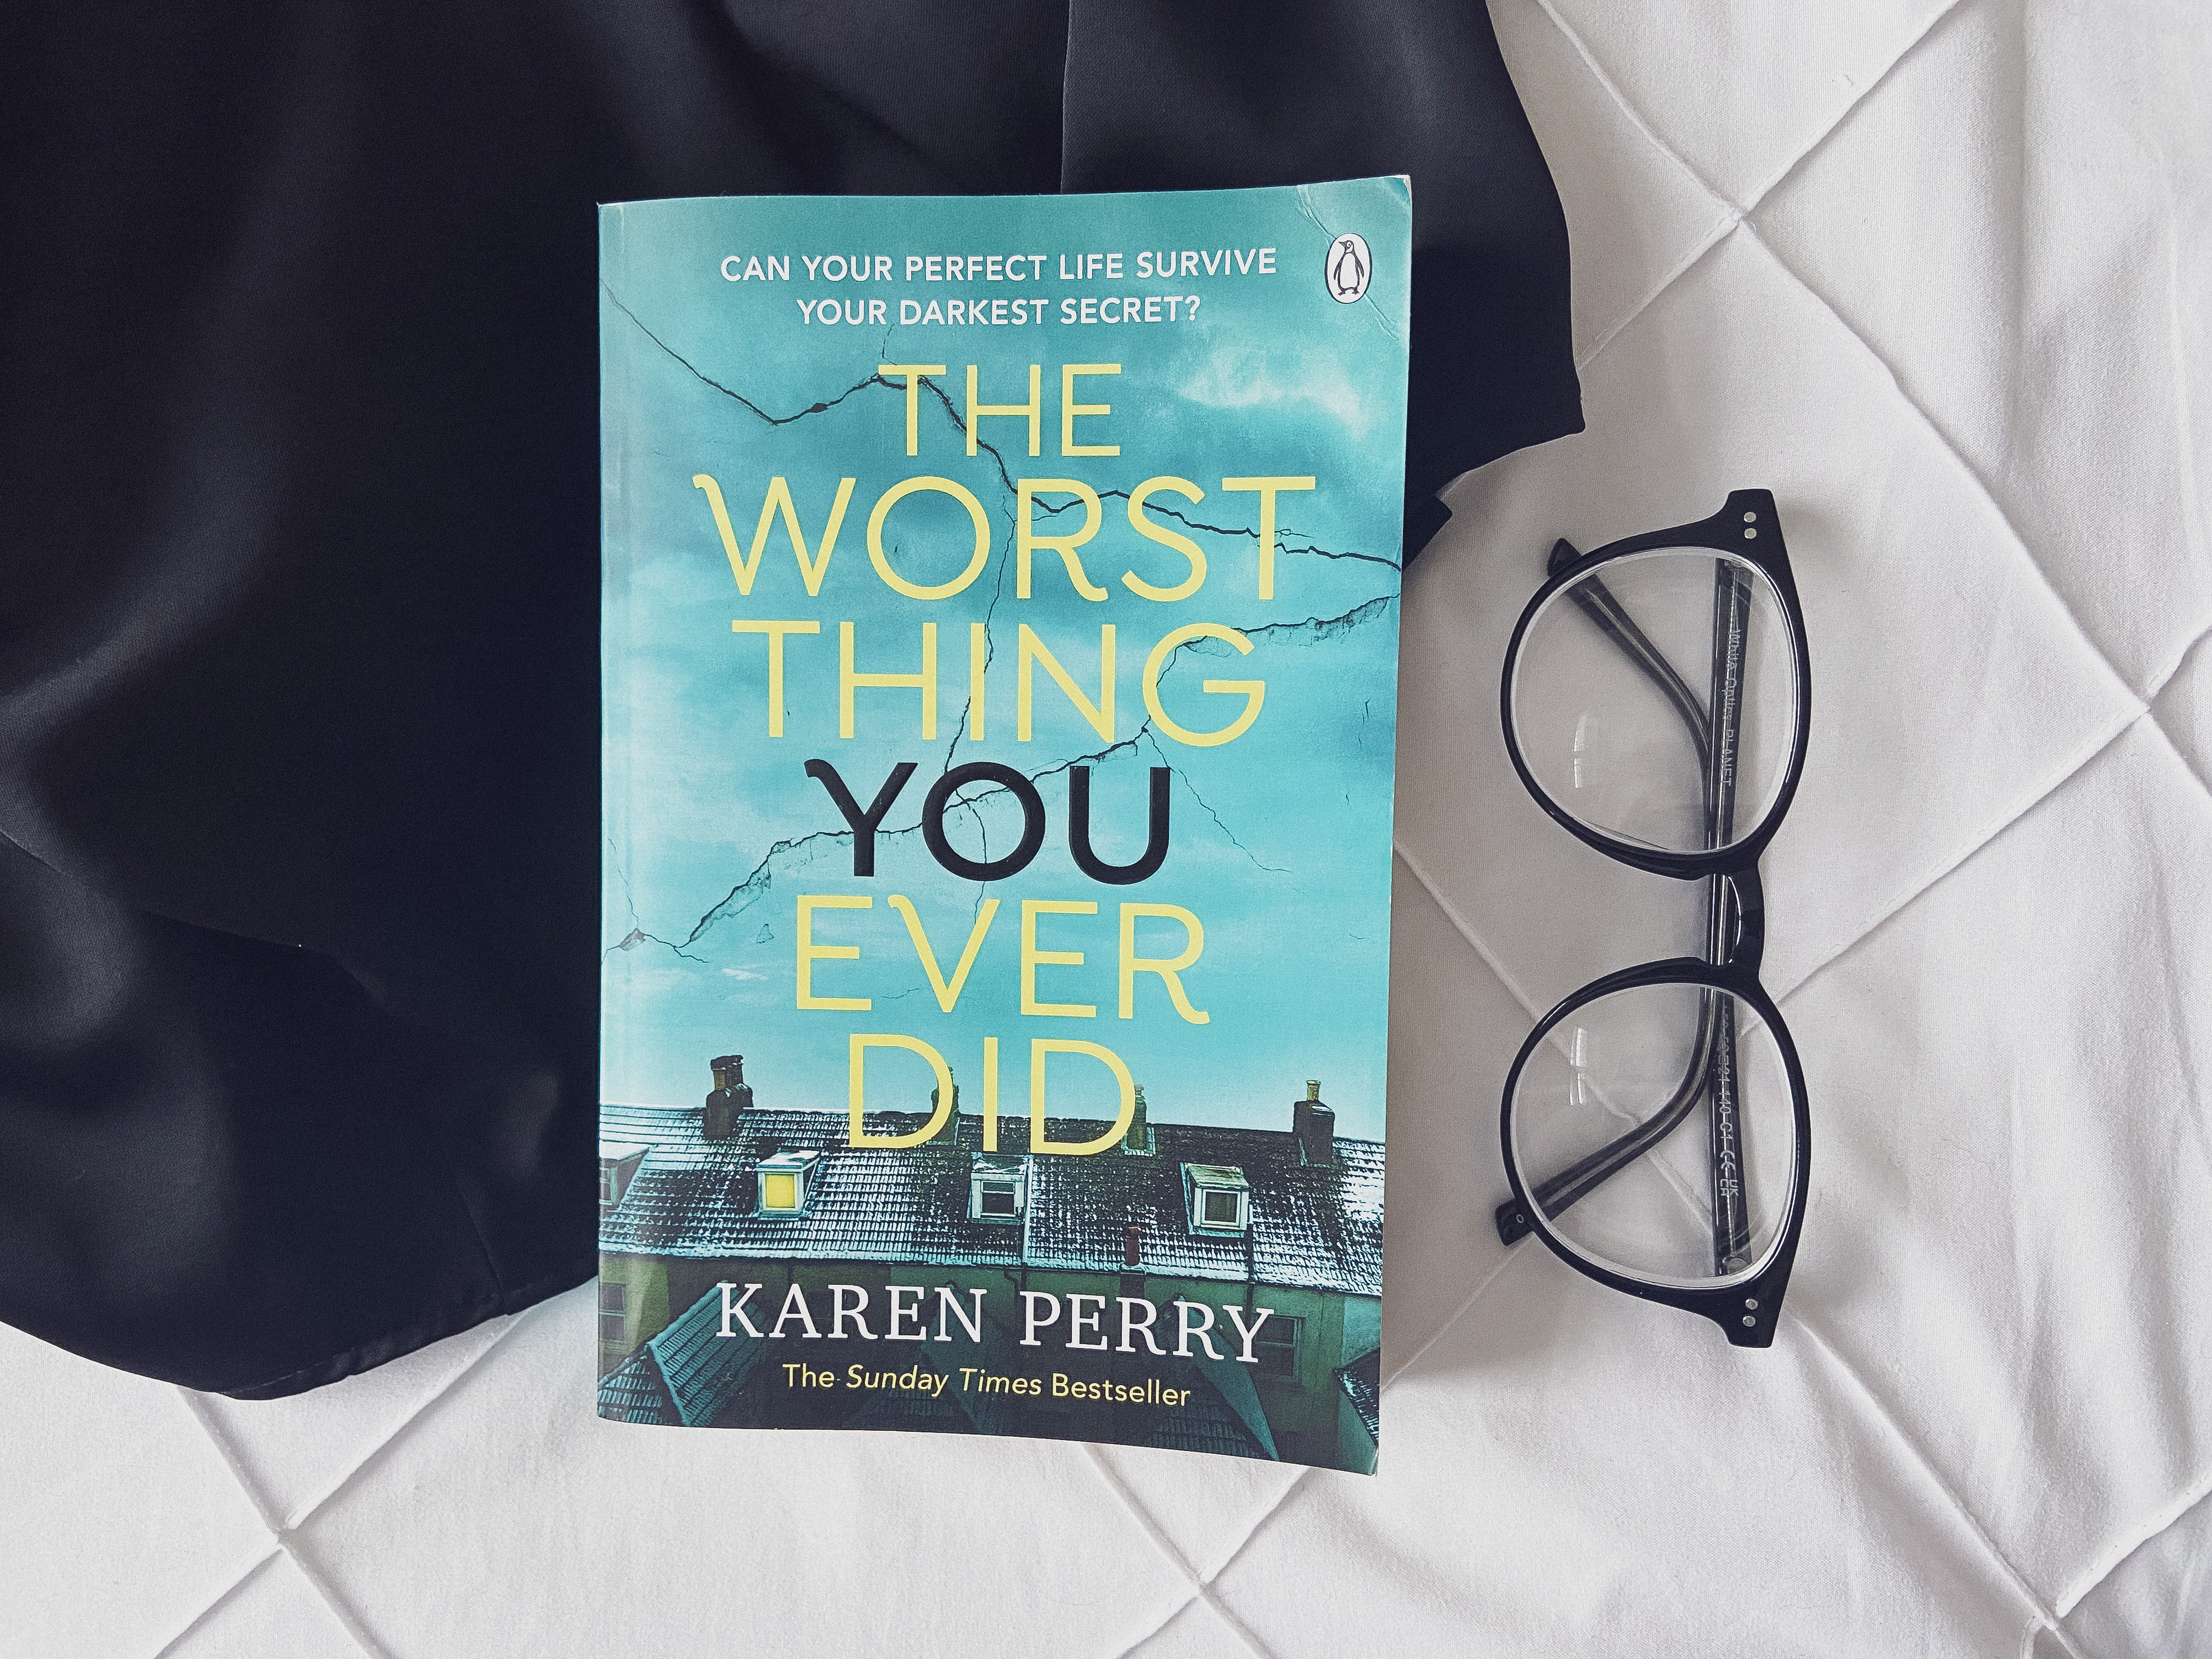 The Worst Thing You Ever Did by Karen Perry book.